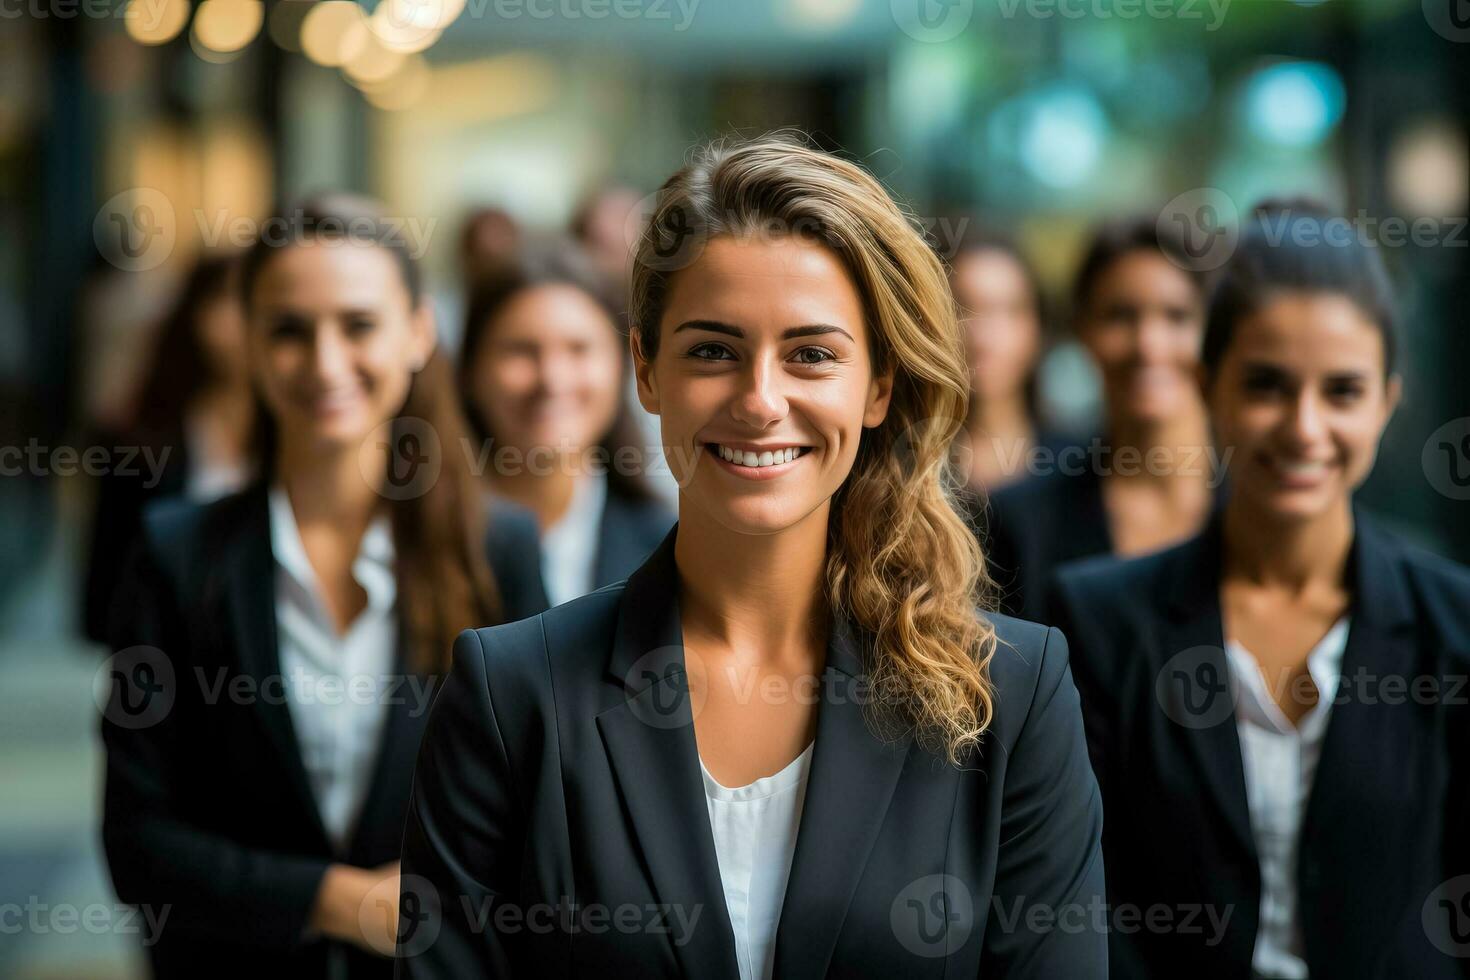 Business professionals standing and waiting in a composed manner for their respective appointments photo